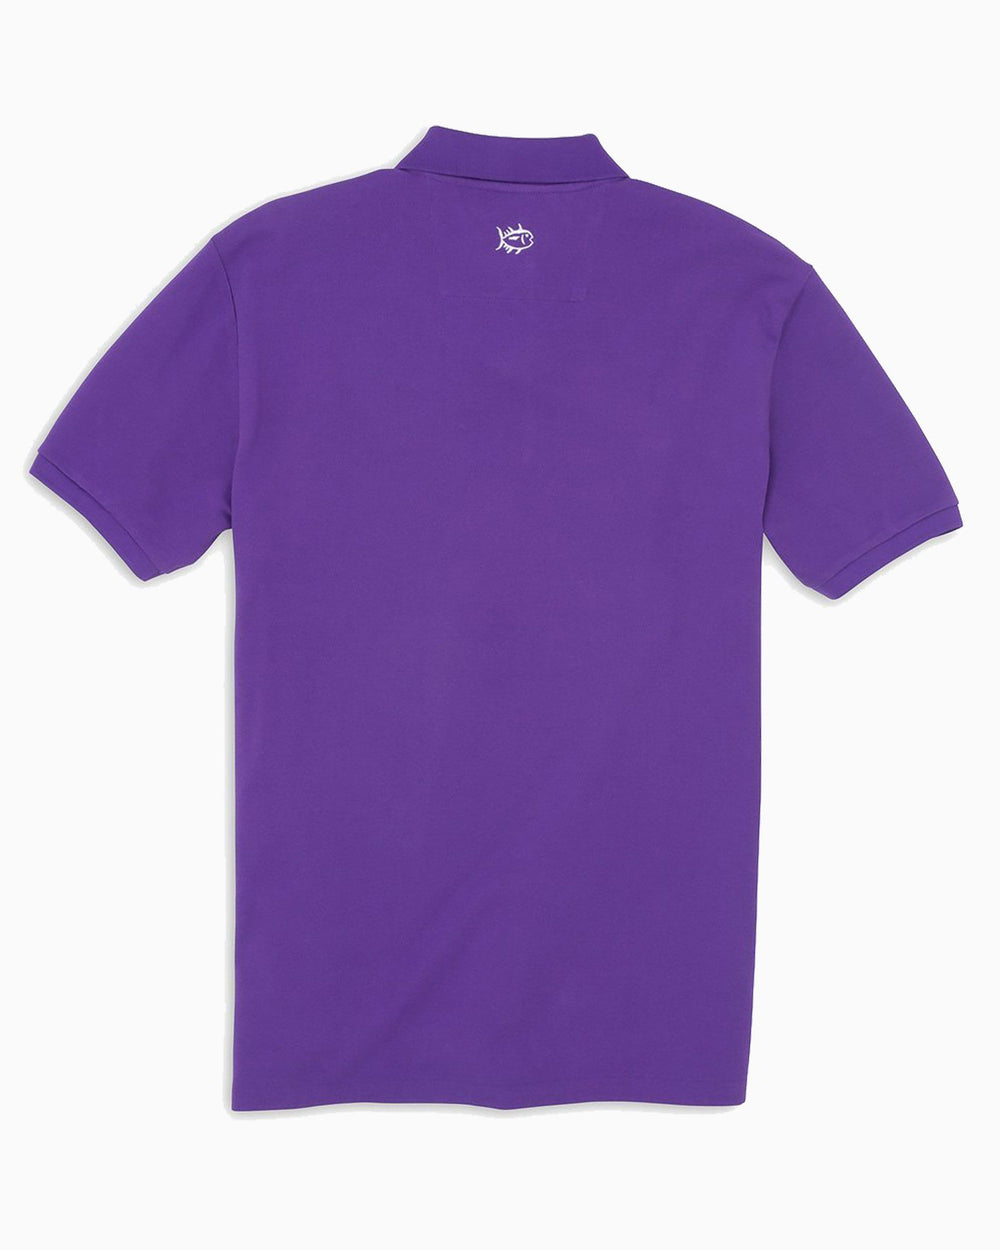 The back view of the Men's Purple East Carolina Pique Polo Shirt by Southern Tide - Regal Purple